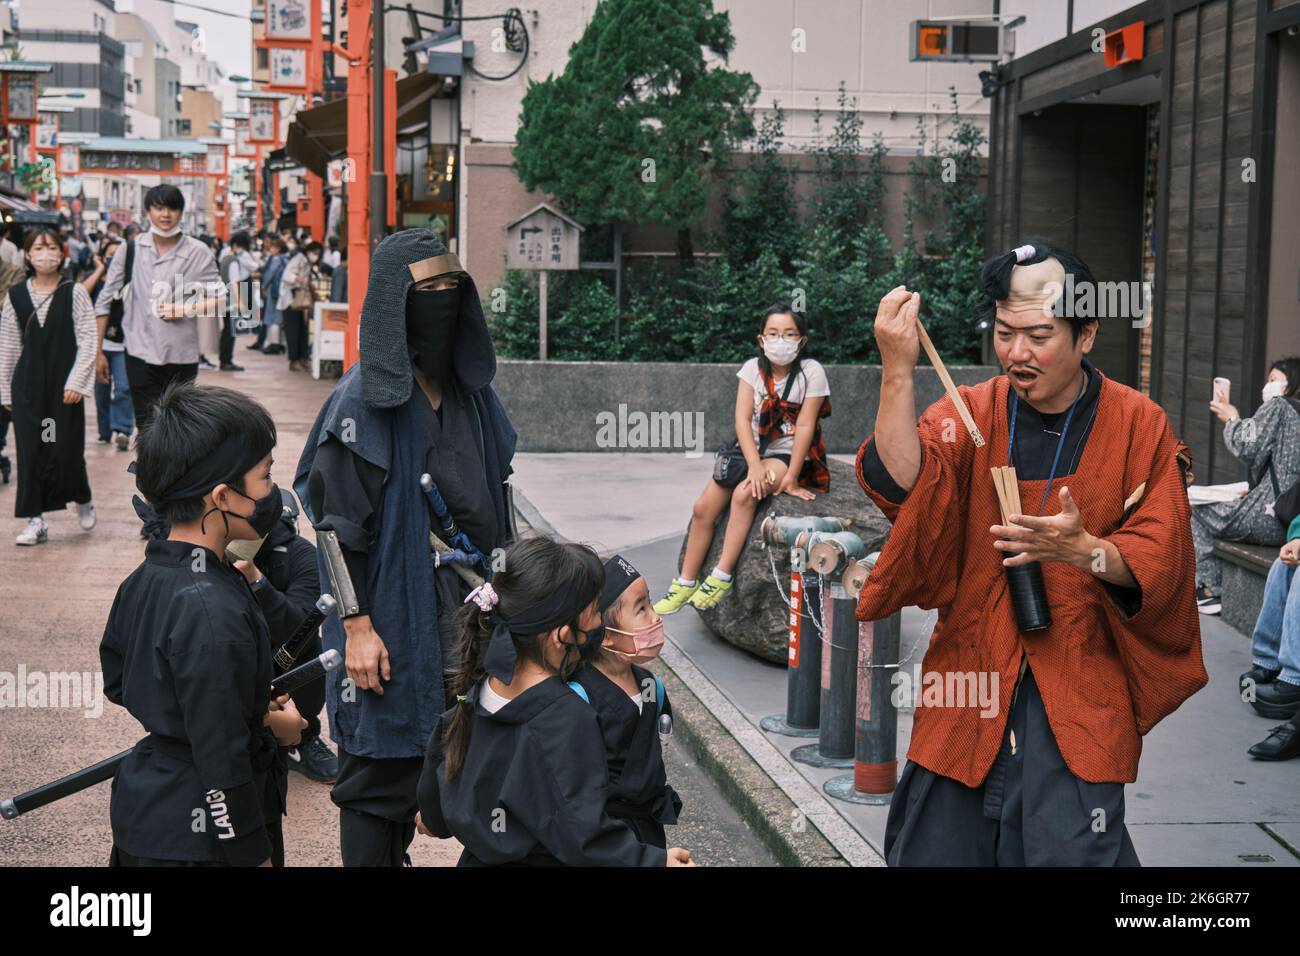 A Japanese traditional comedy actor dressing in Edo style with kids acting Ninja on street near the Asakusa area Stock Photo